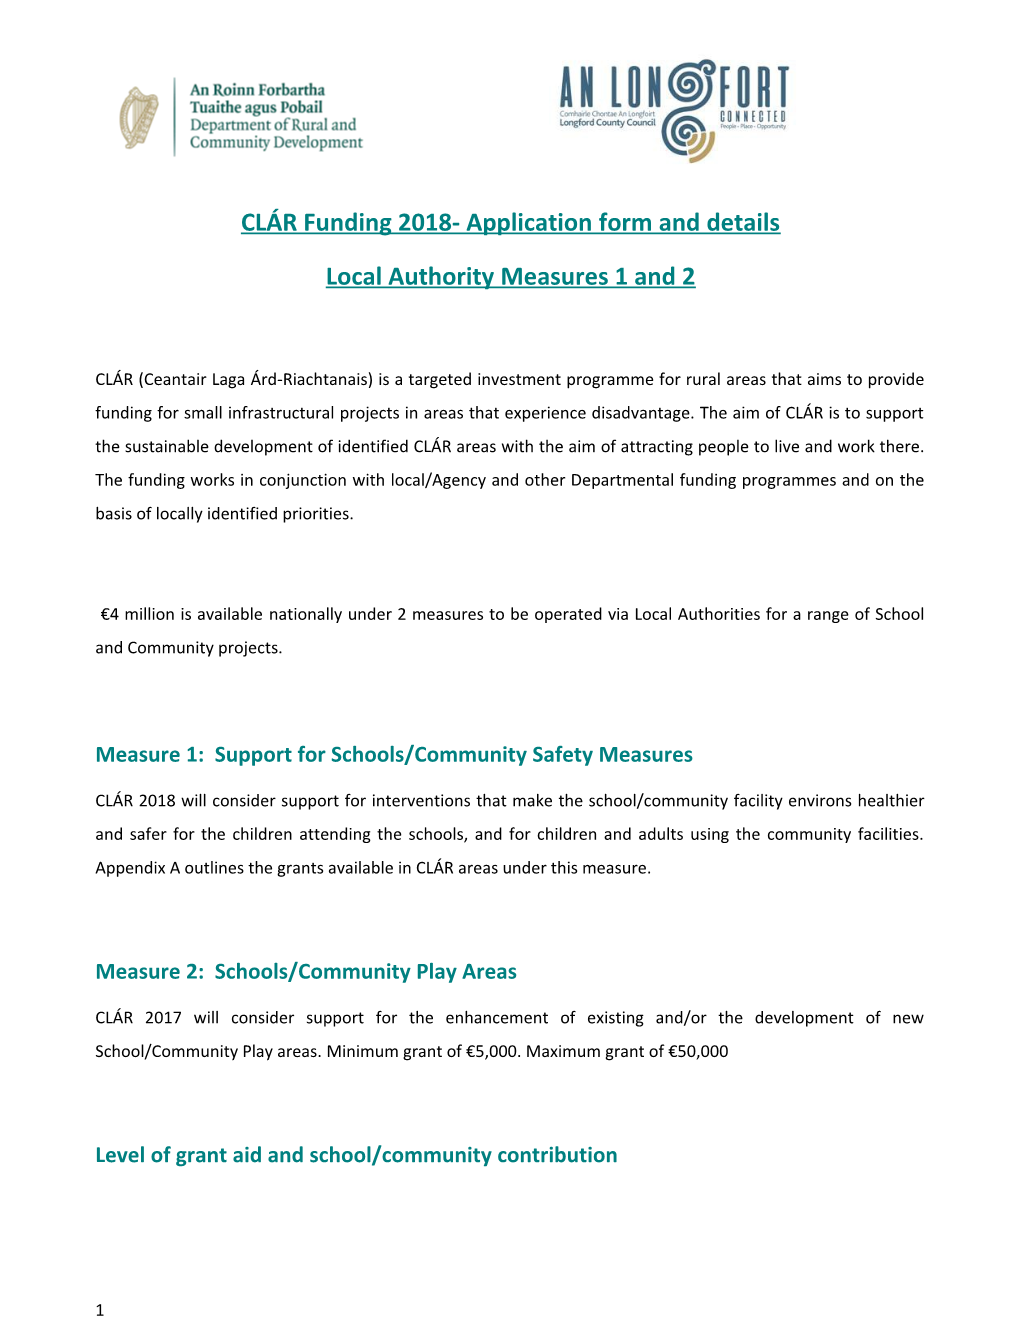 CLÁR Funding 2018- Application Form and Details